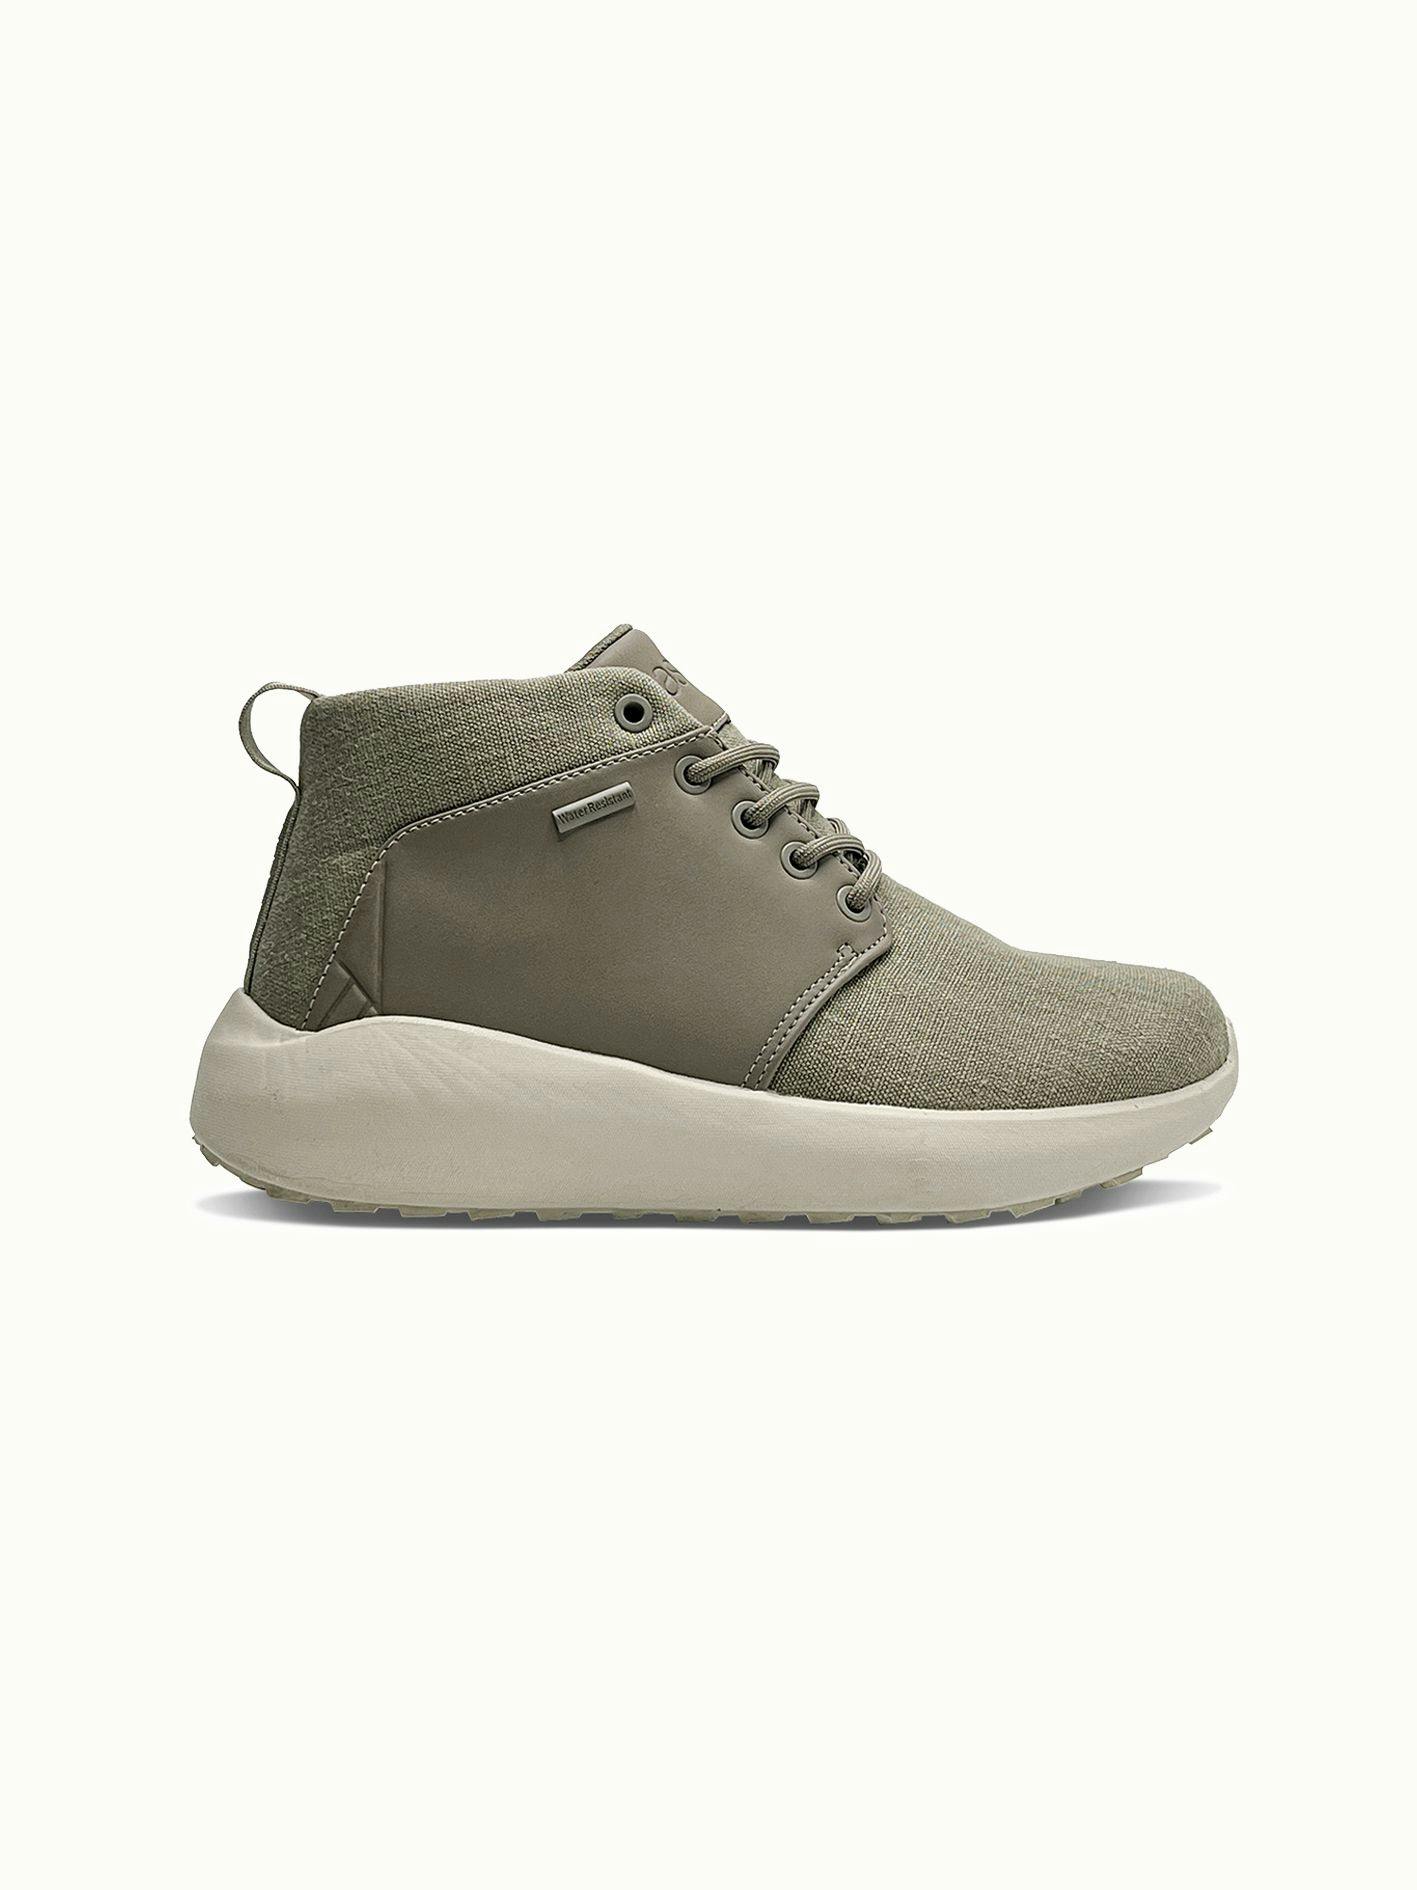 The Madla Terrain Hemp high-top sneaker provides a hemp upper with a terrain sole for timeless waterproof protection.